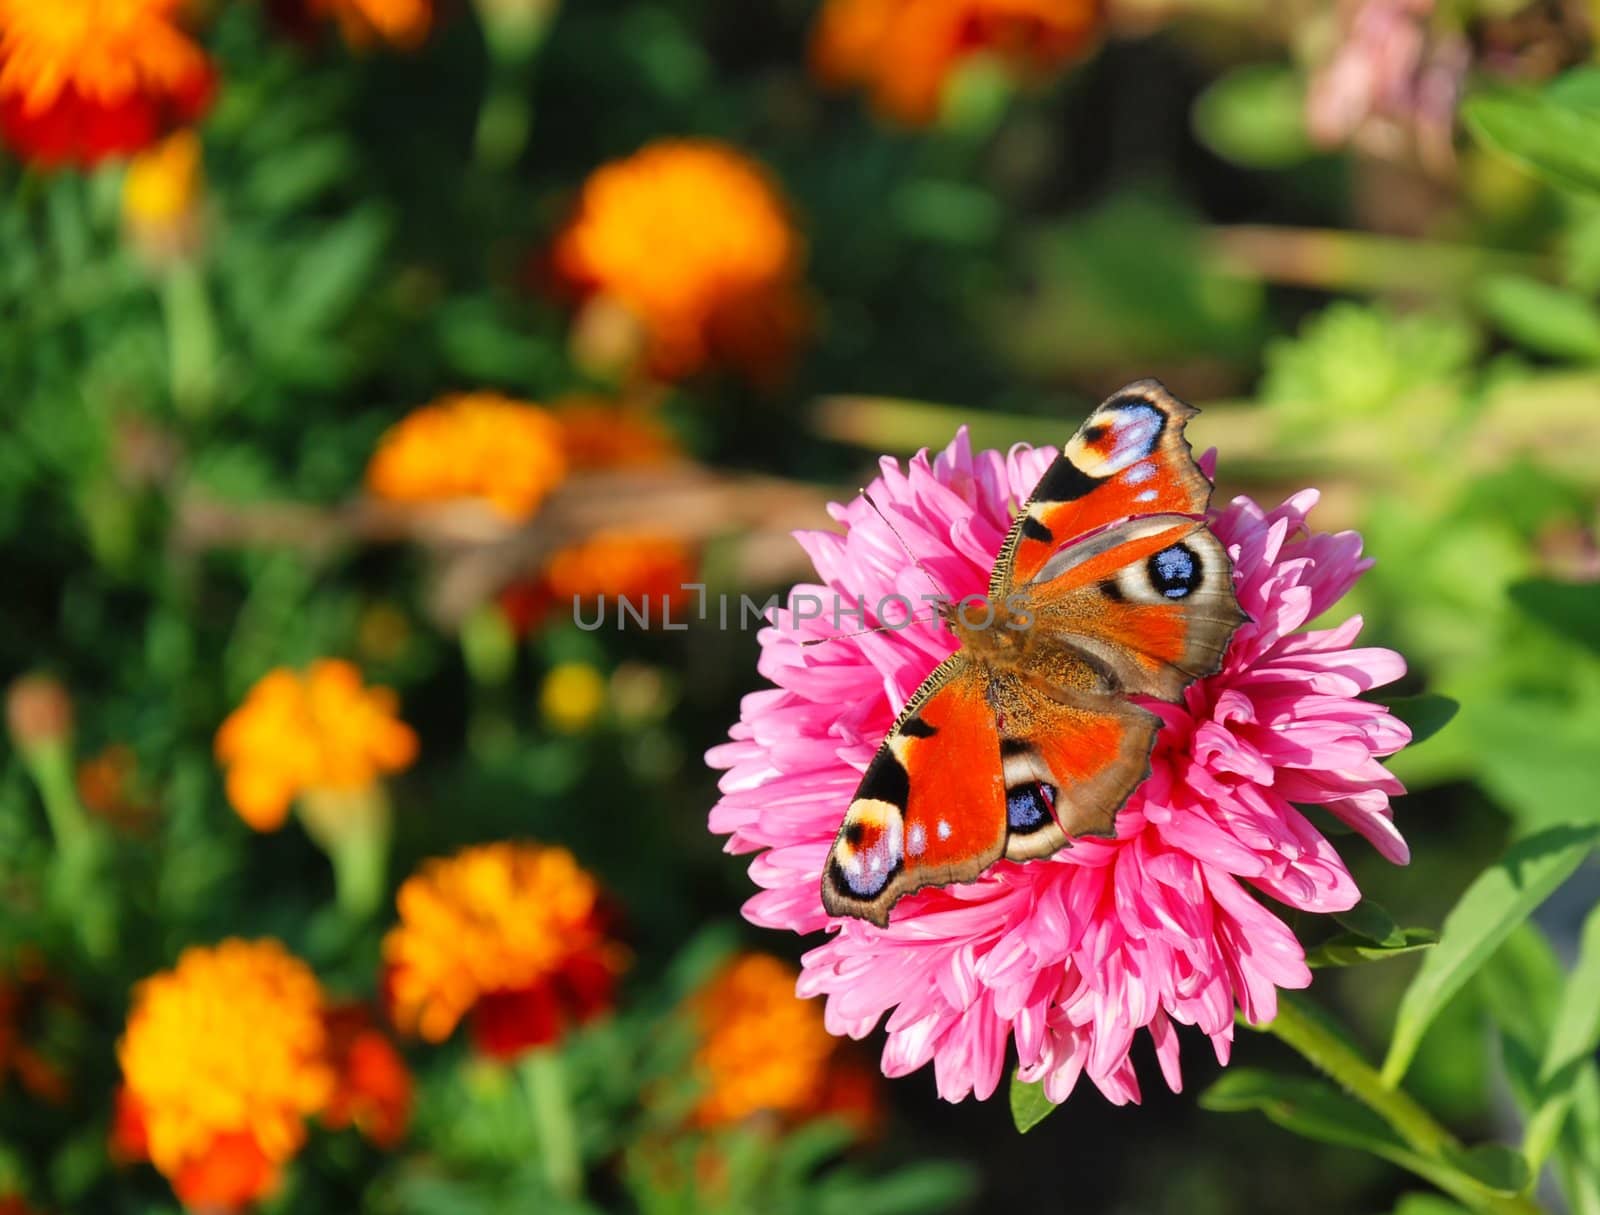 Butterfly on flowers  by borgdrone